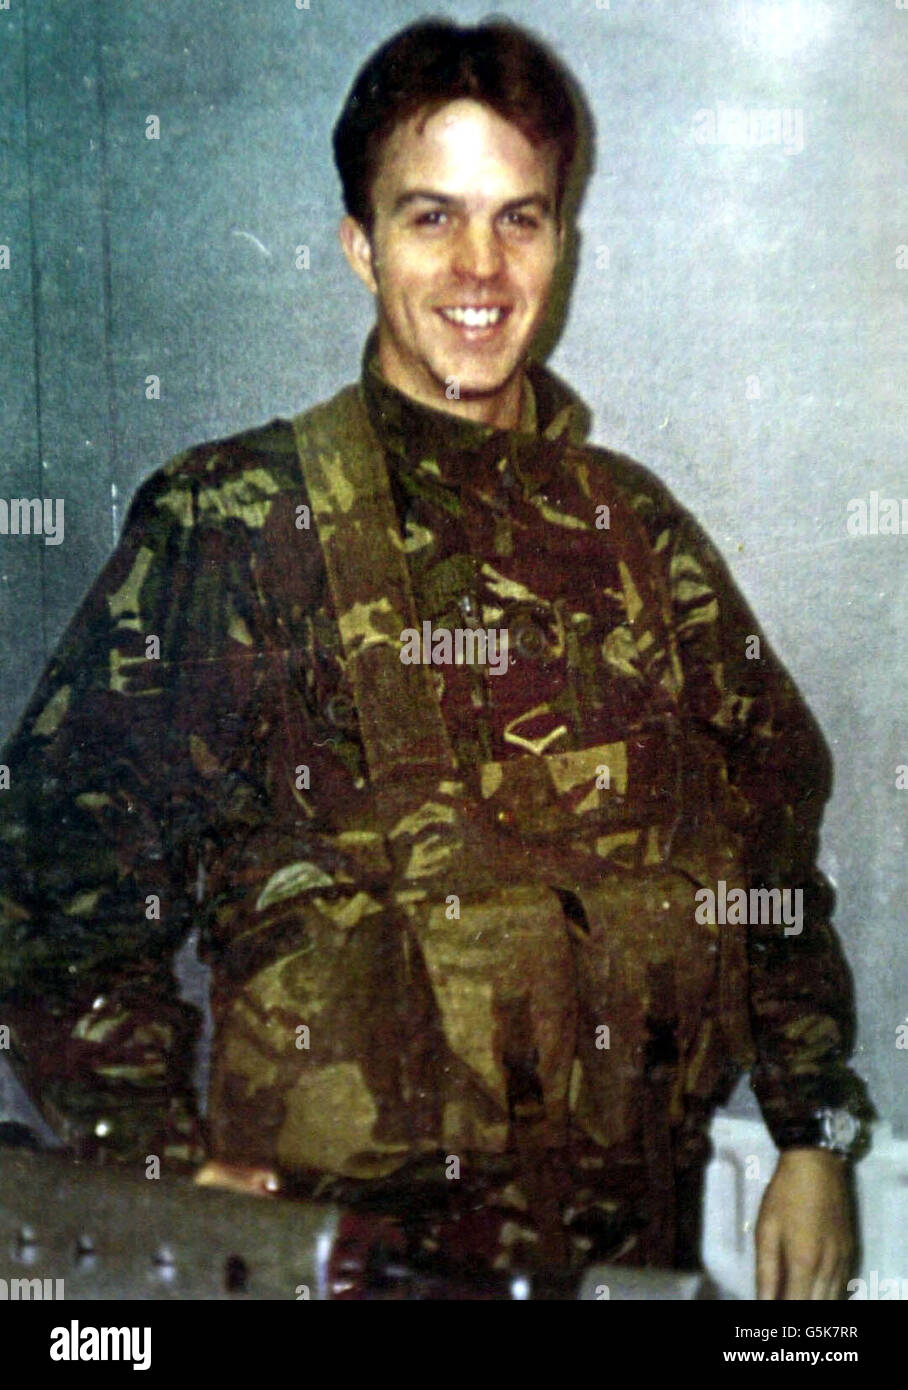 Lance Bombardier Stephen Restorick who was killed while manning a checkpoint at Bessbrook, Northern Ireland, in February 1997. Stephen's mother Rita Restorick's, mother latest bid for compensation was heard at Nottingham Magistrates Court. * The hearing was held to determine if Mrs Restorick, of Underwood, Nottinghamshire, had suffered mental injury as a result of seeing images of the aftermath of her son's killing. The closed hearing took just over two hours before the panel announced it would not make a decision until this Friday. Stock Photo